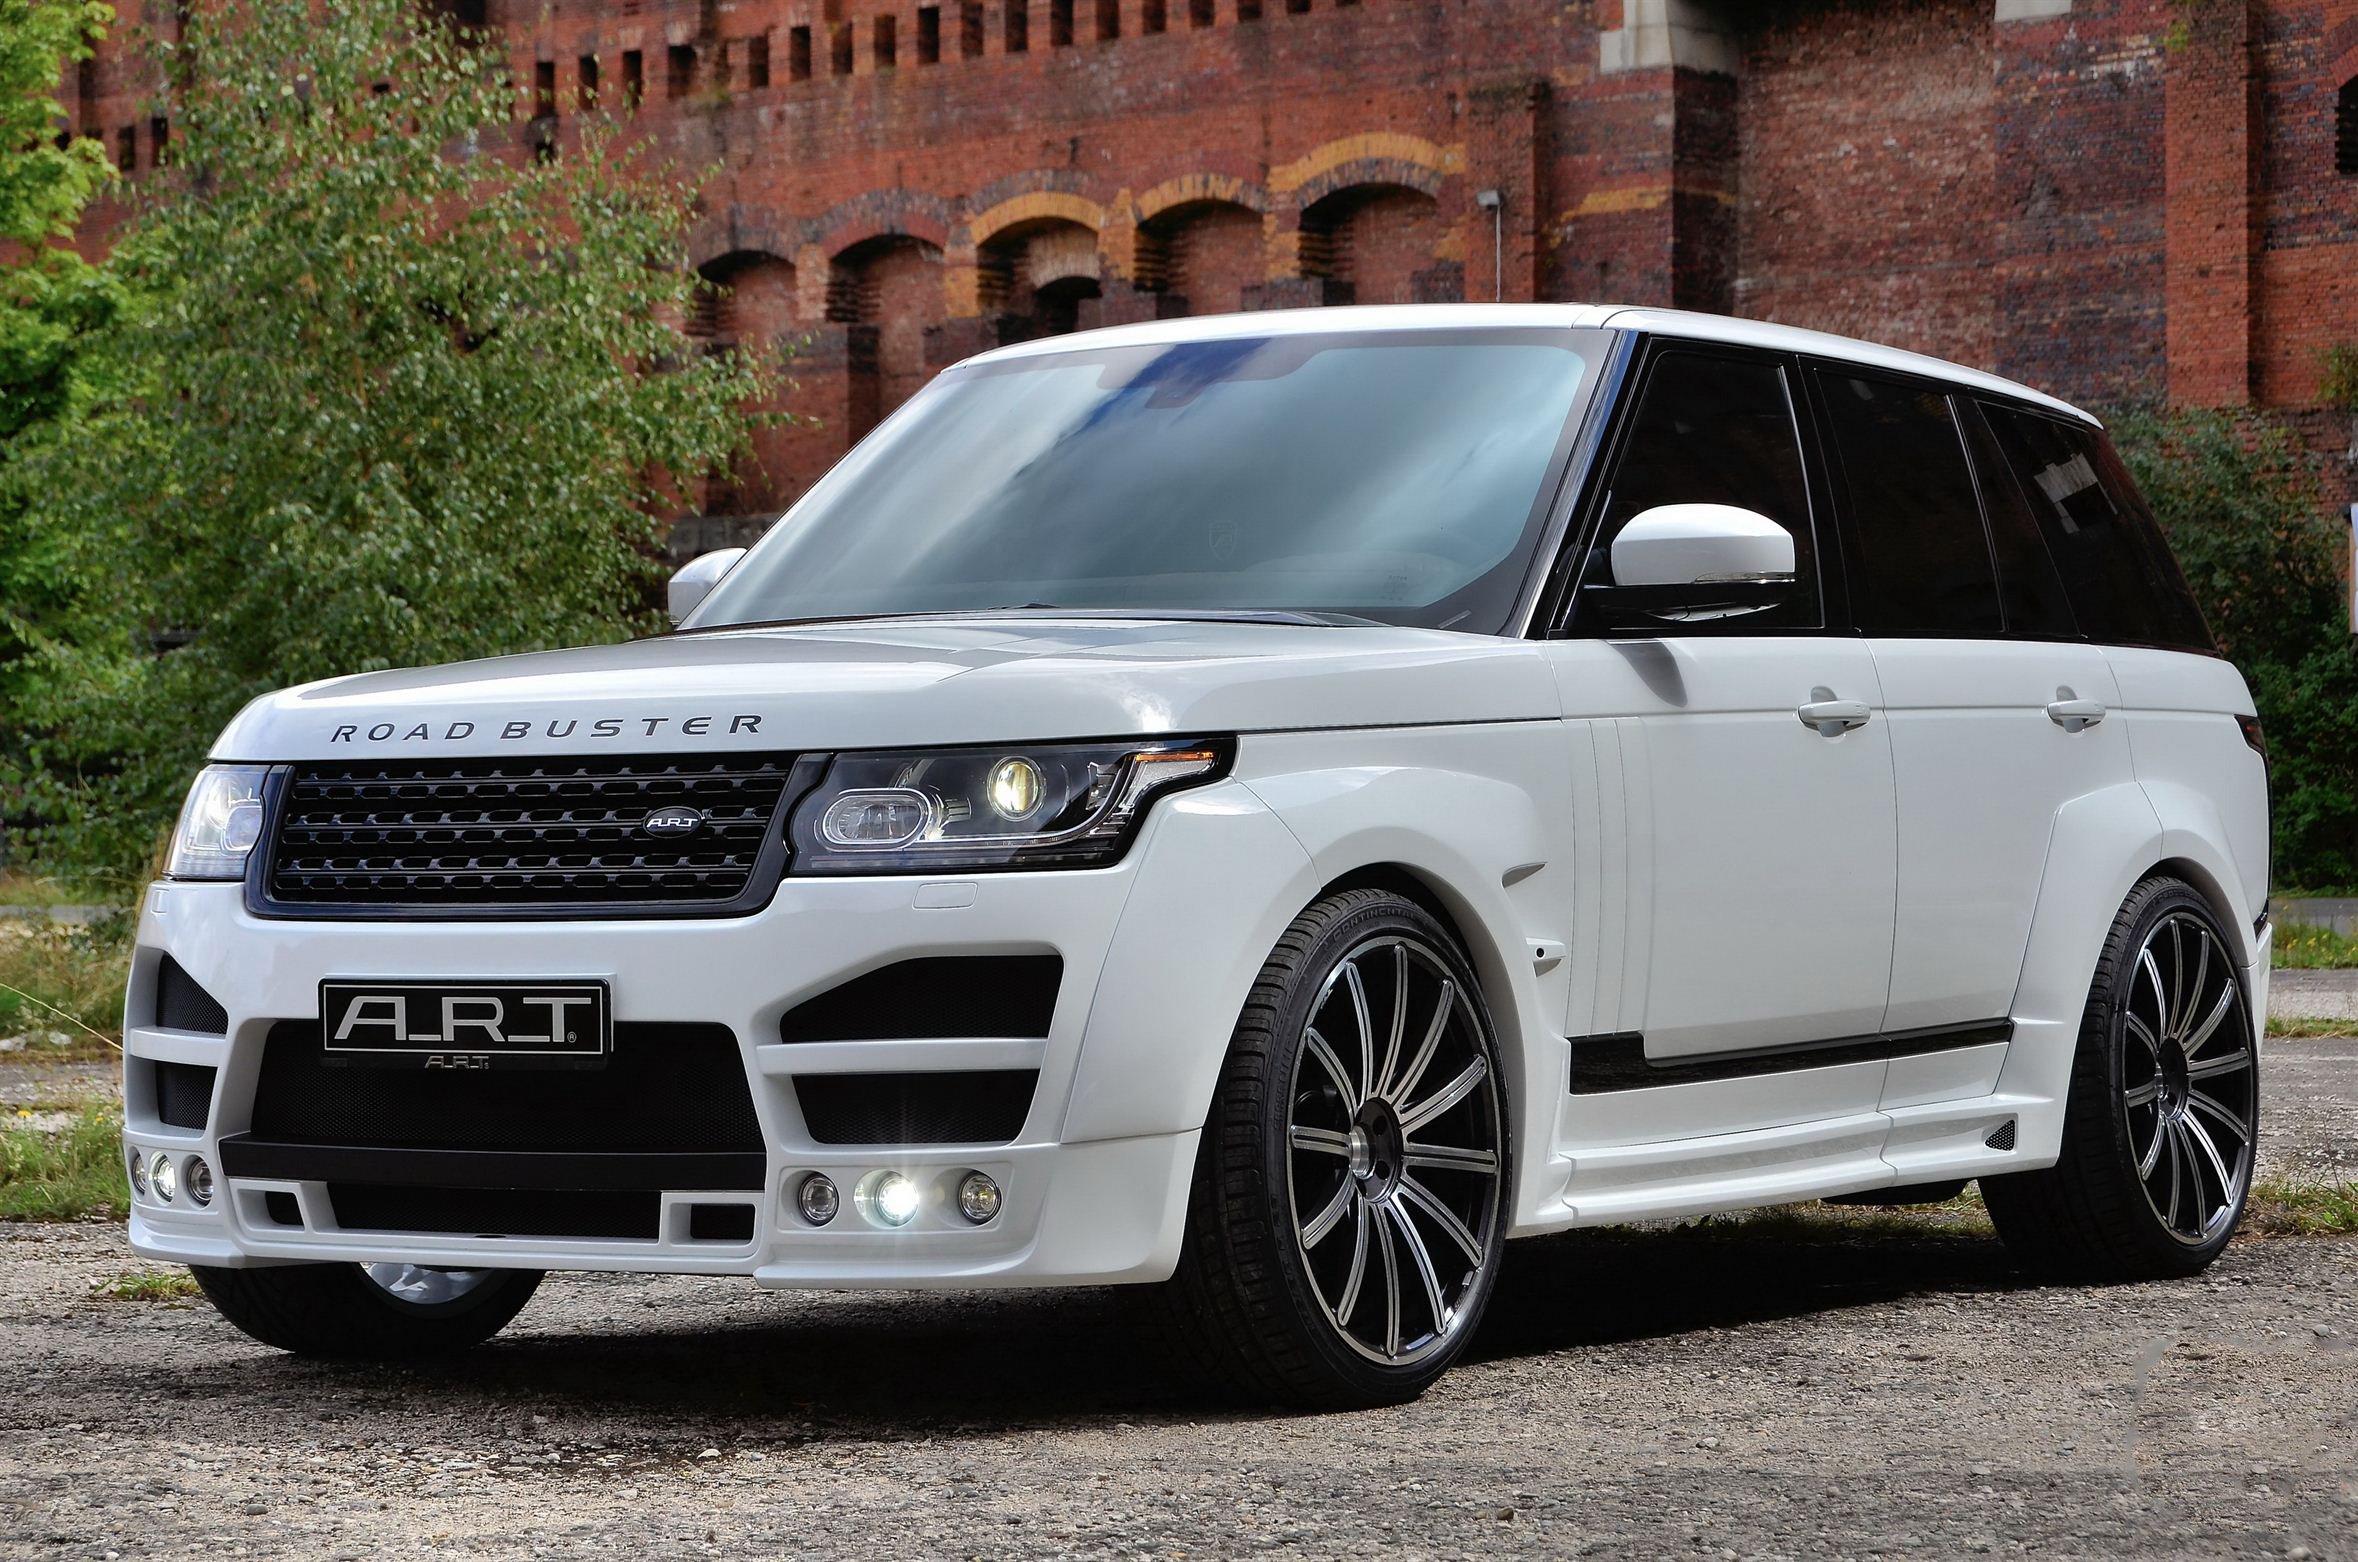 art, Range, Rover, Road, Buster, Cars, Modified, Suv, 2013 Wallpaper